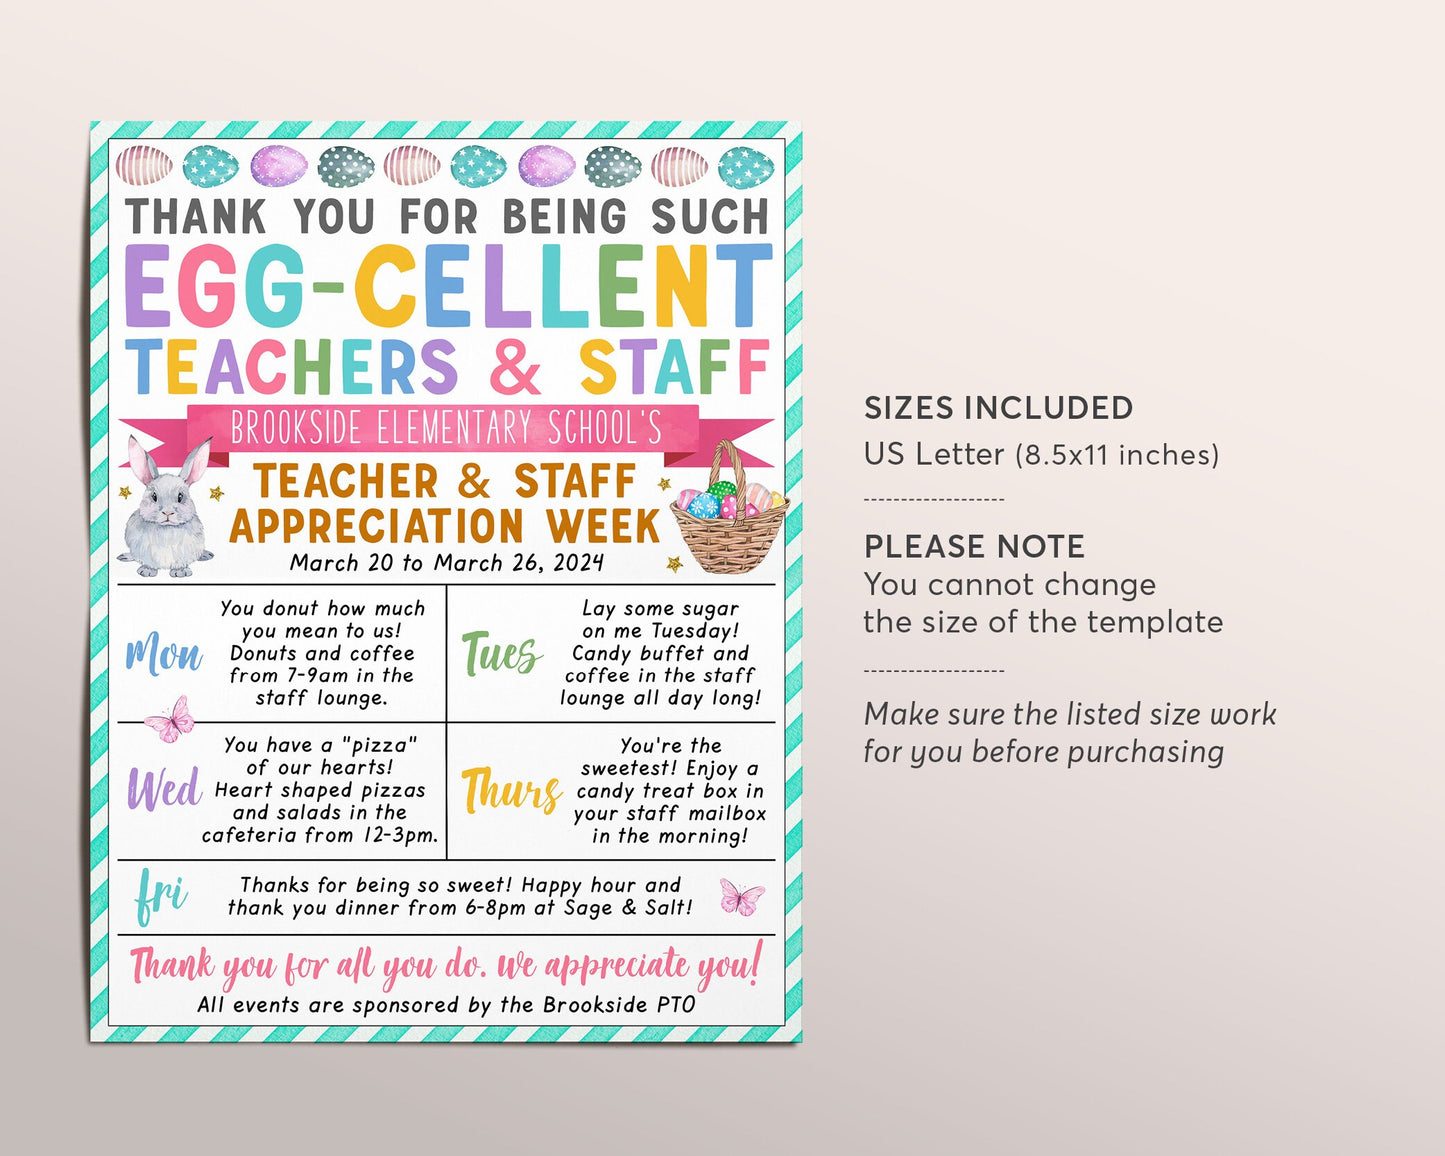 Easter Theme Teacher Staff Appreciation Week Itinerary Flyer Editable Template, Egg-cellent Spring Theme Schedule Newsletter Poster PTO PTA